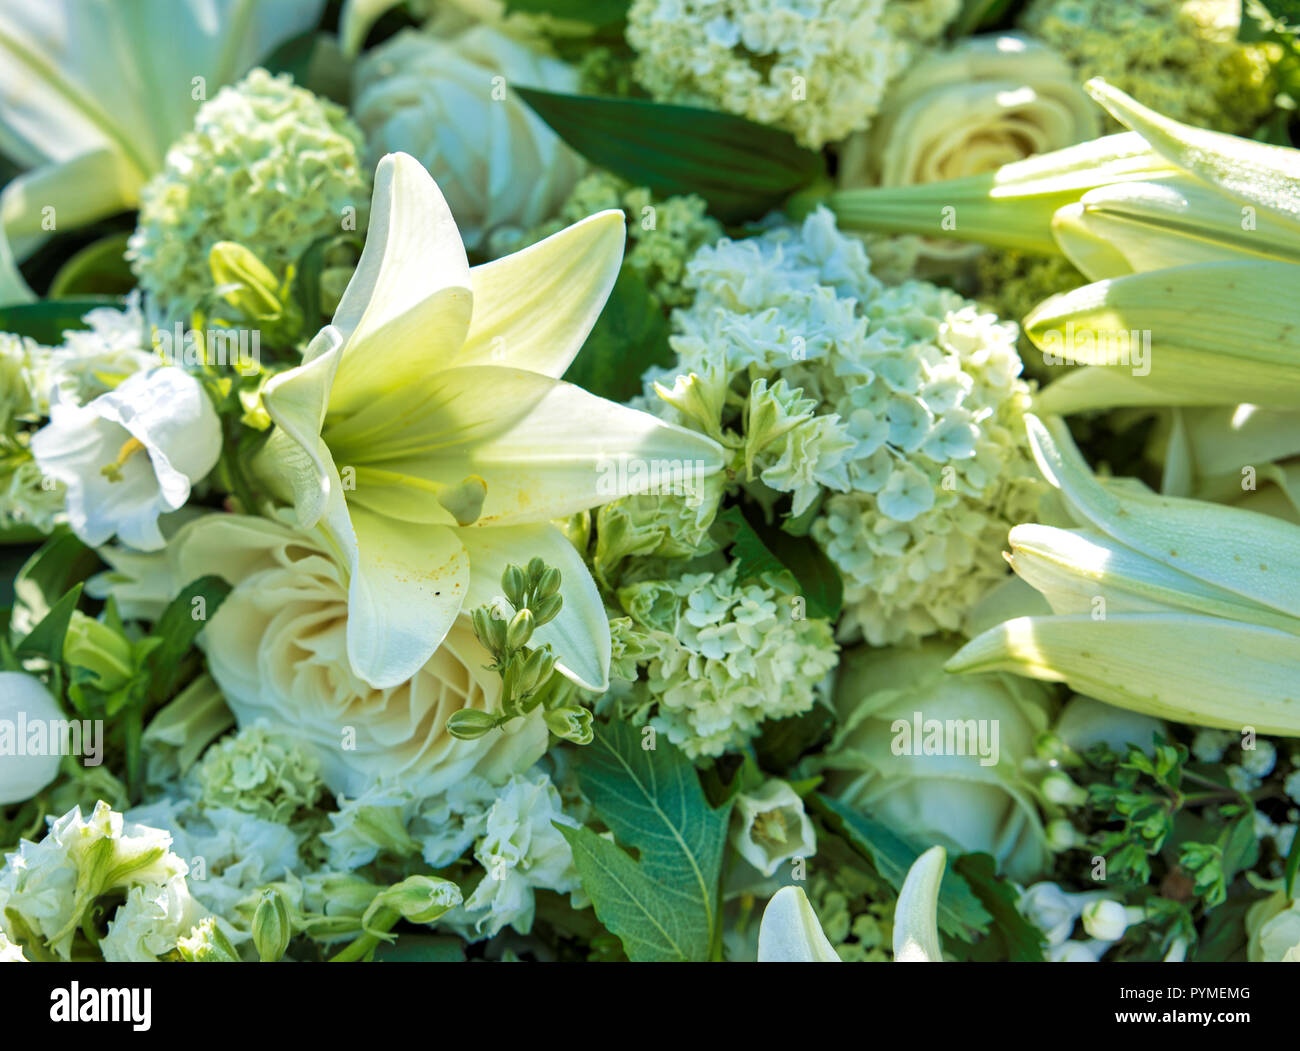 white funeral flowers with green leaves Stock Photo